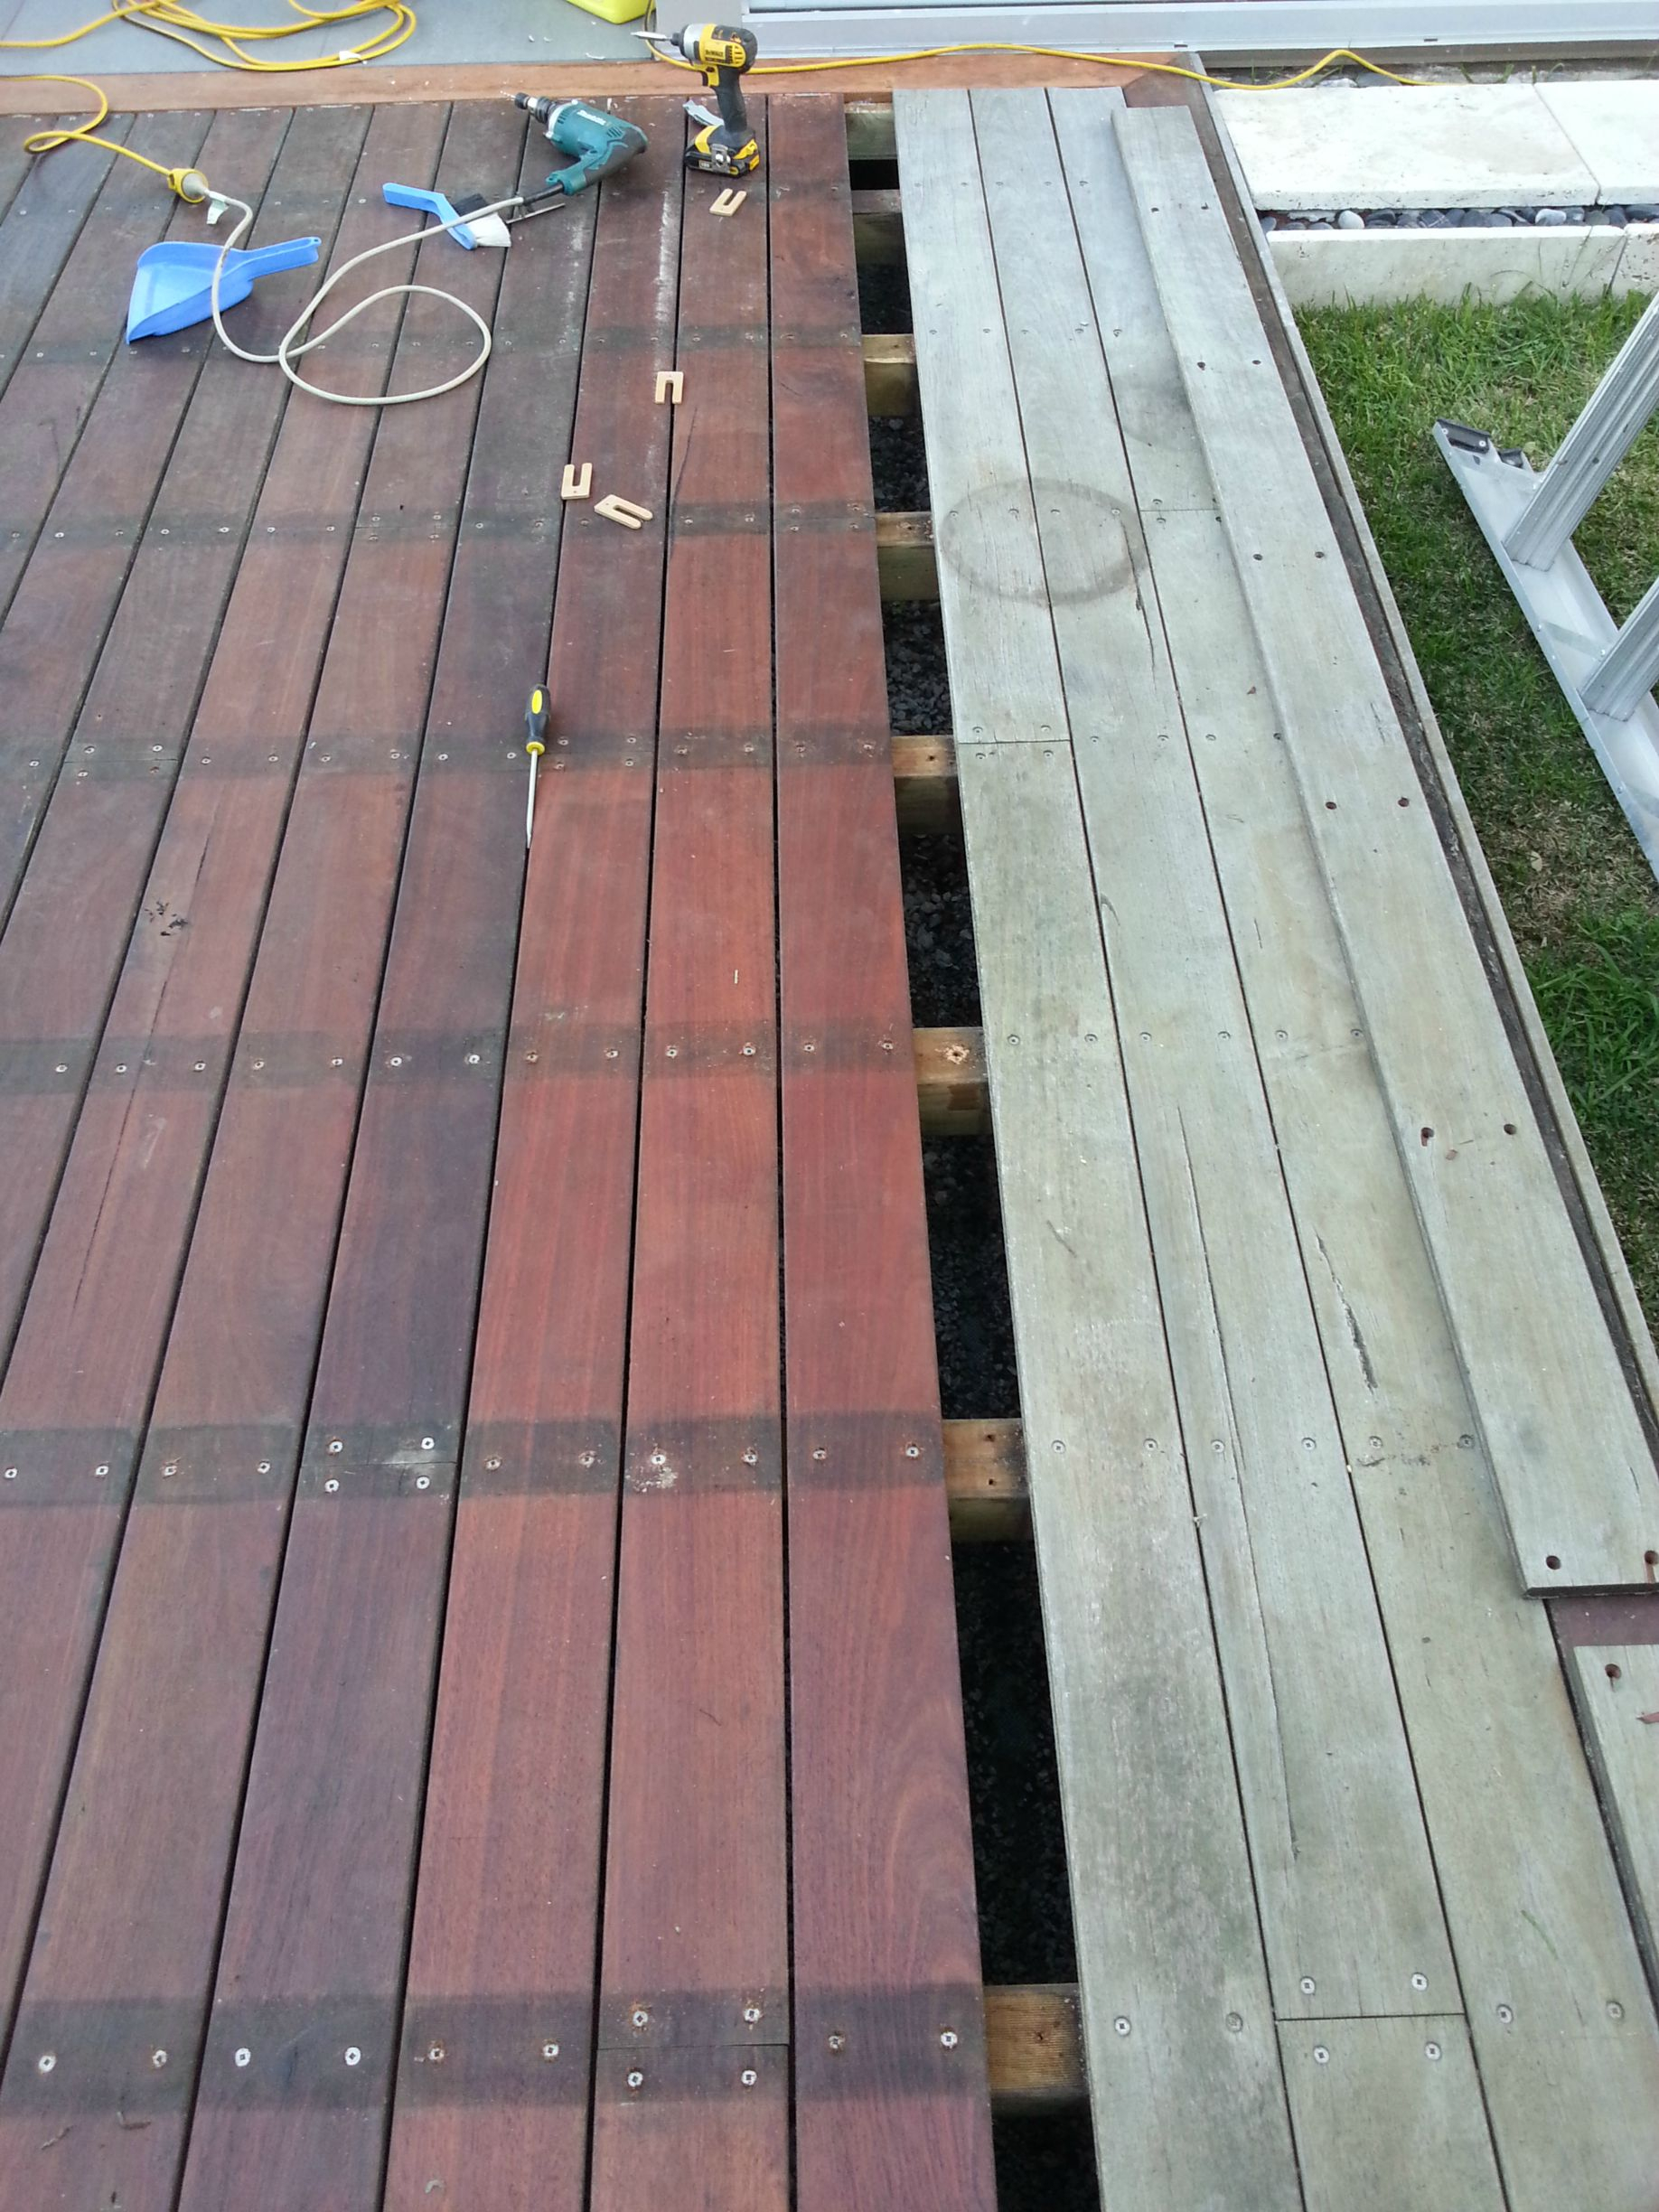 Psa After Youve Built Your Nice New Timber Deck Make Sure To for dimensions 1836 X 2448